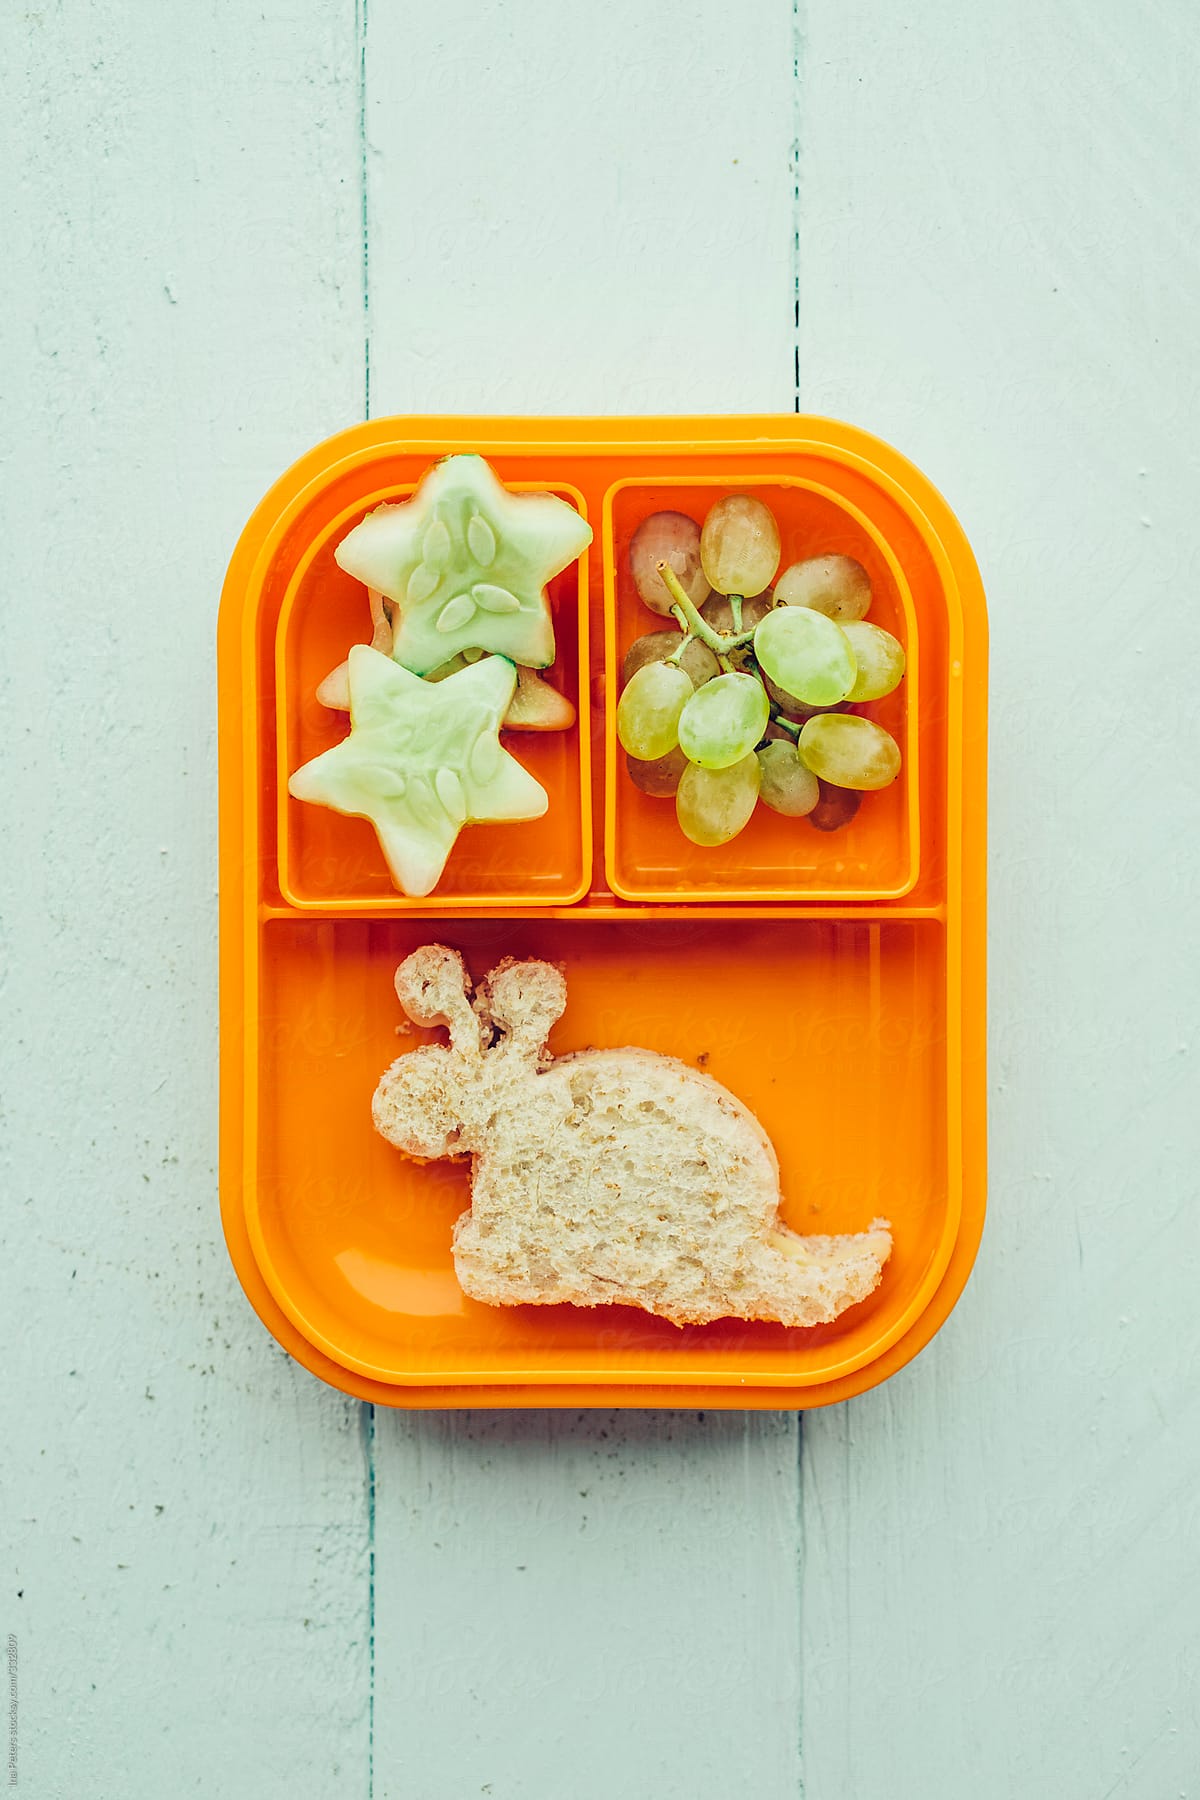 Food: Childrens' school snack, snail-shaped sandwich with cheese and tomato, star-shaped cucumber and grapes